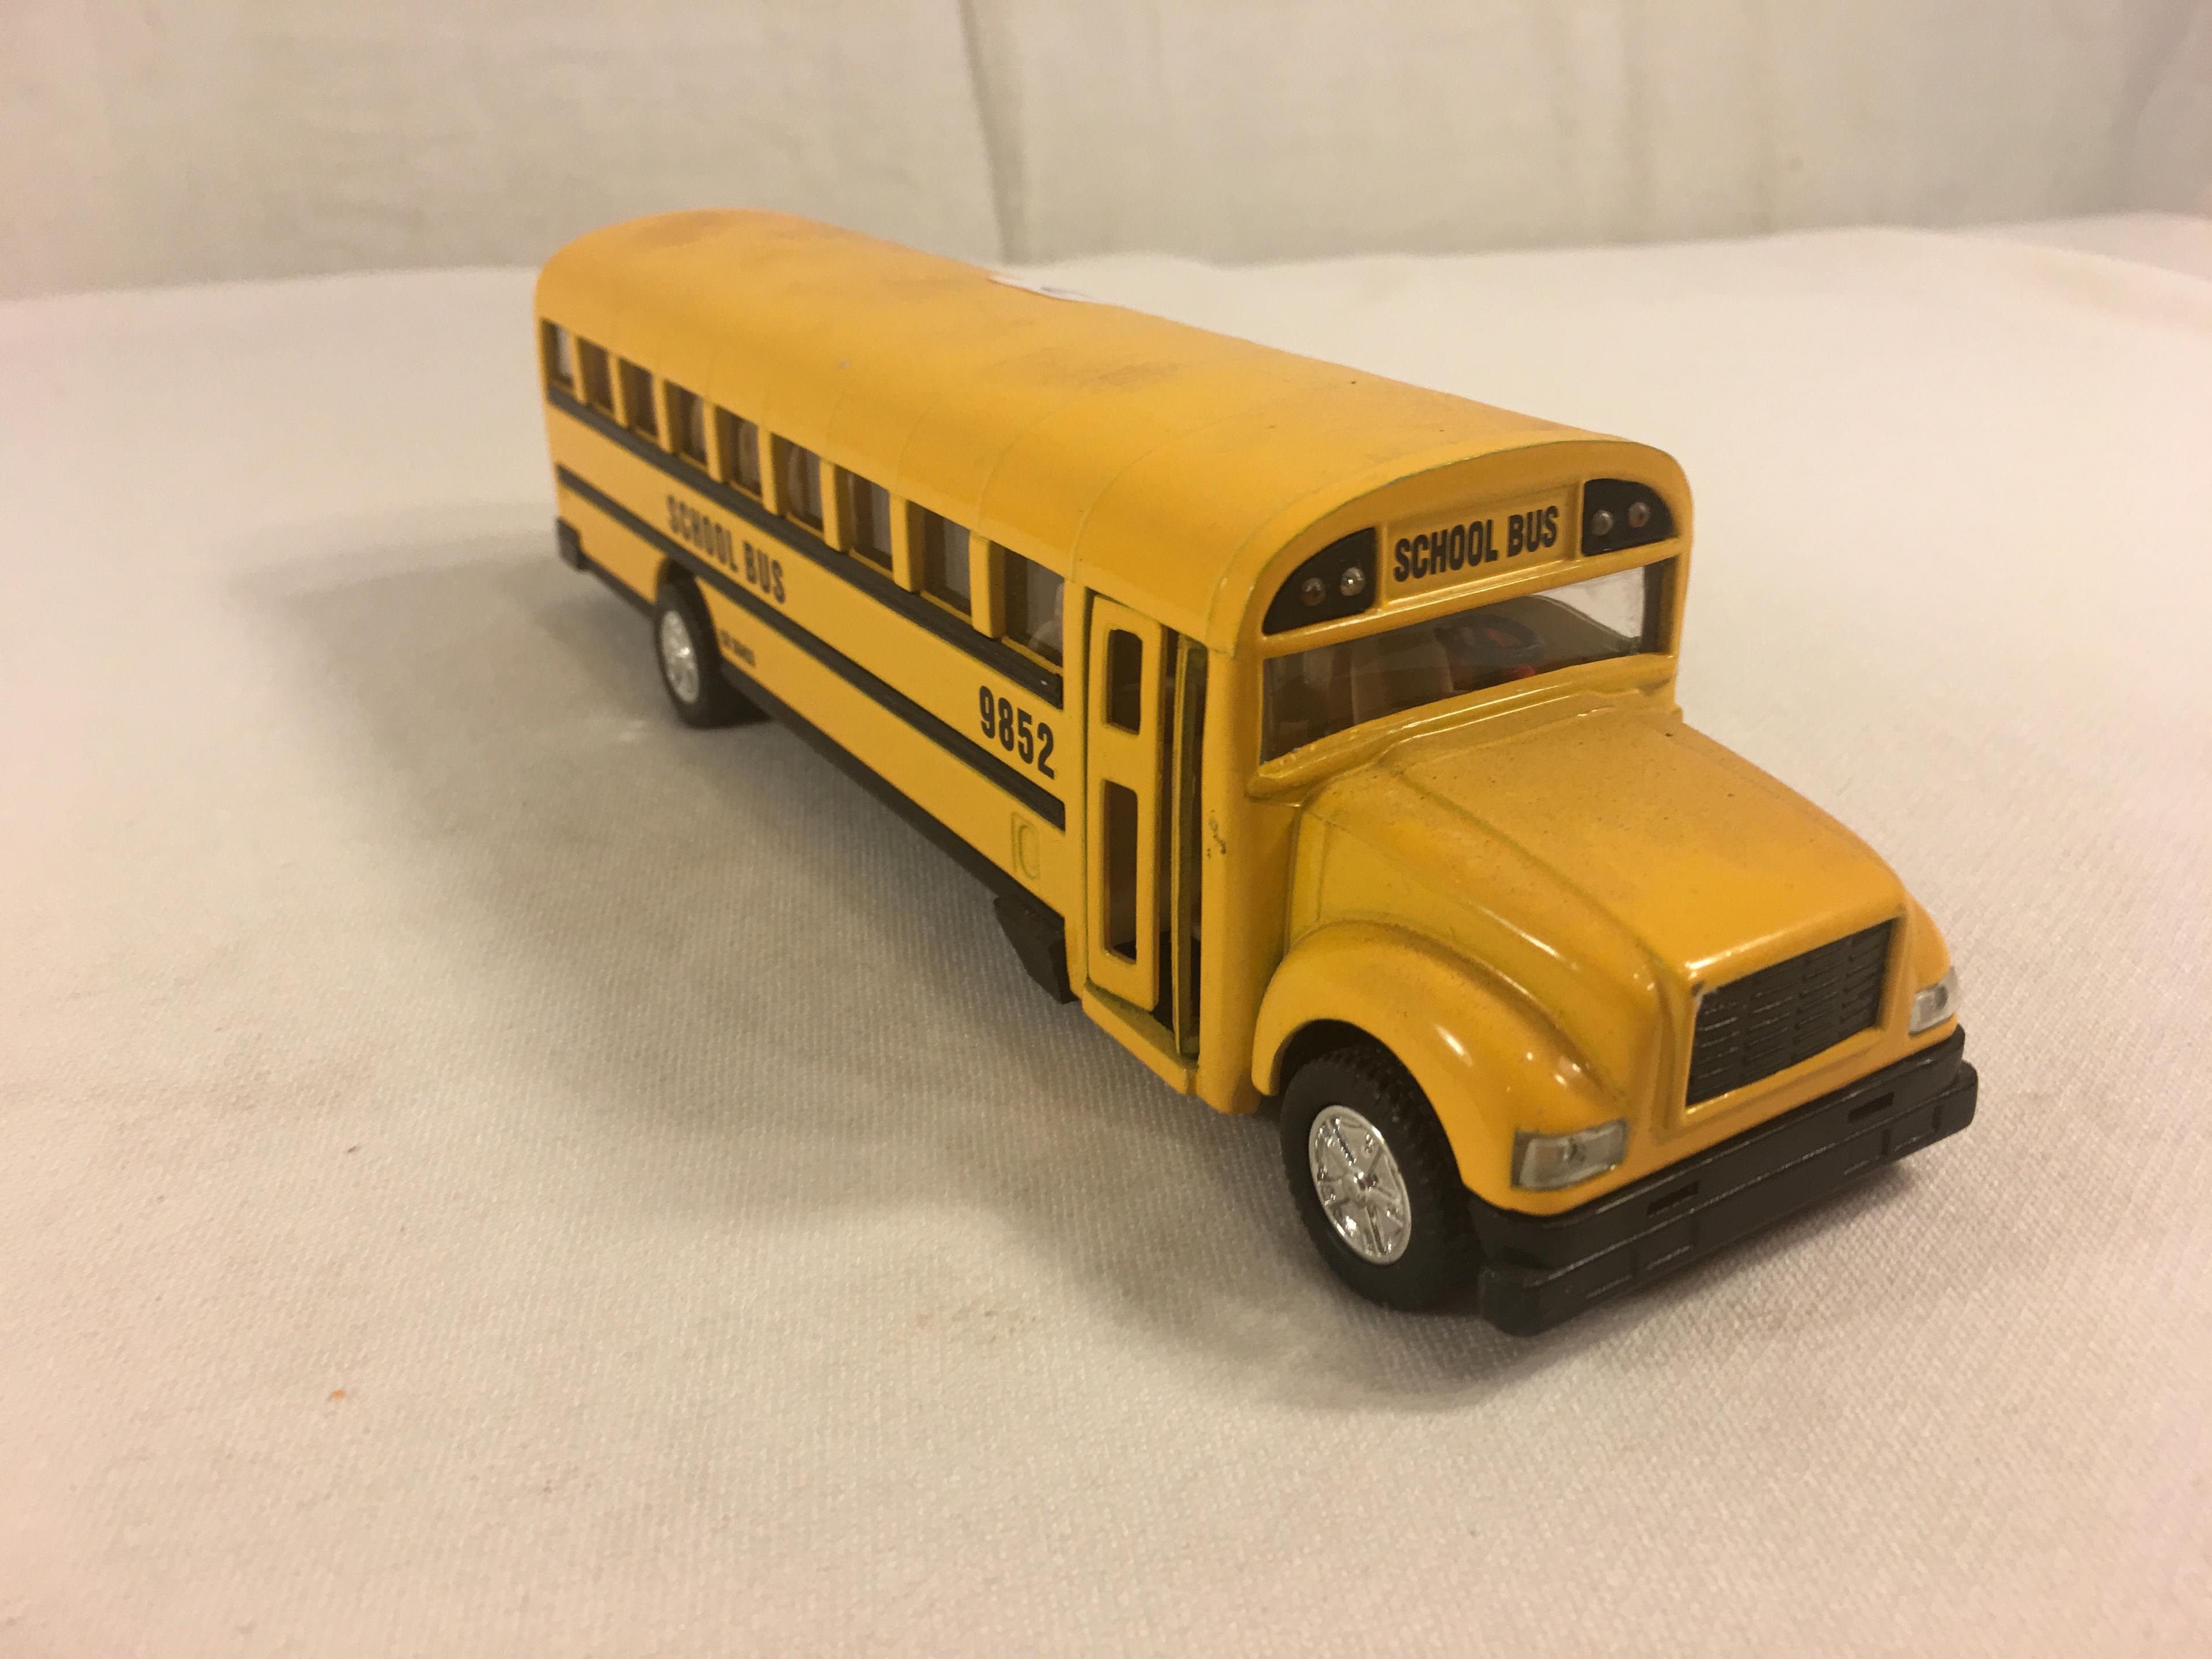 Collector Loose SS 9852  School Bus Truck Size: 8.3/8" Long - See Photos